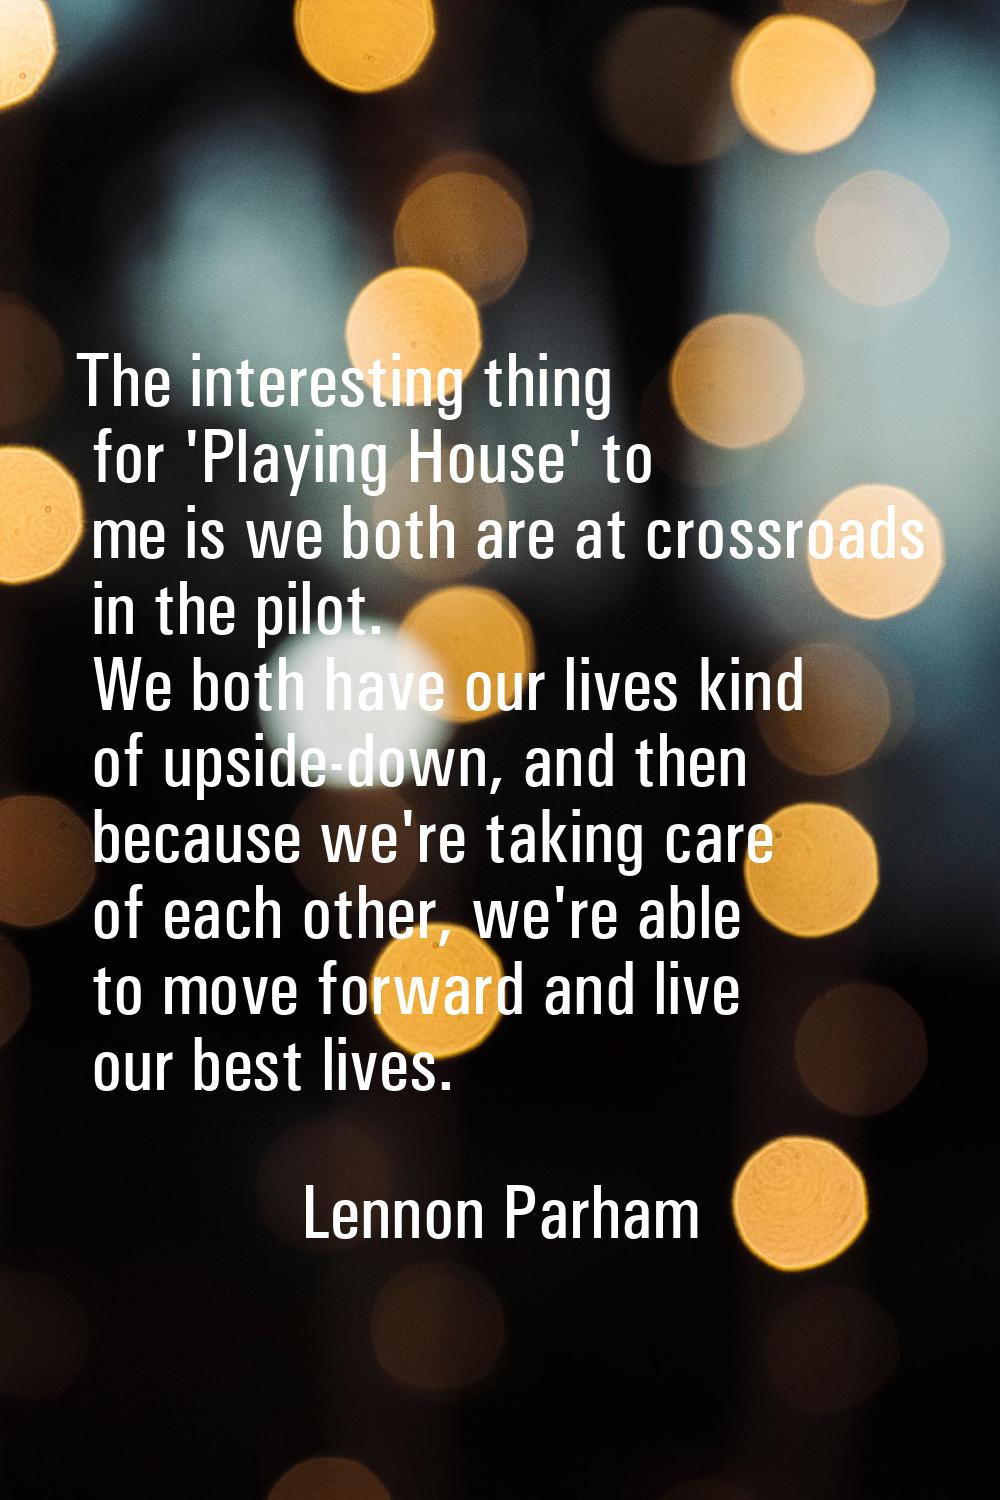 The interesting thing for 'Playing House' to me is we both are at crossroads in the pilot. We both 